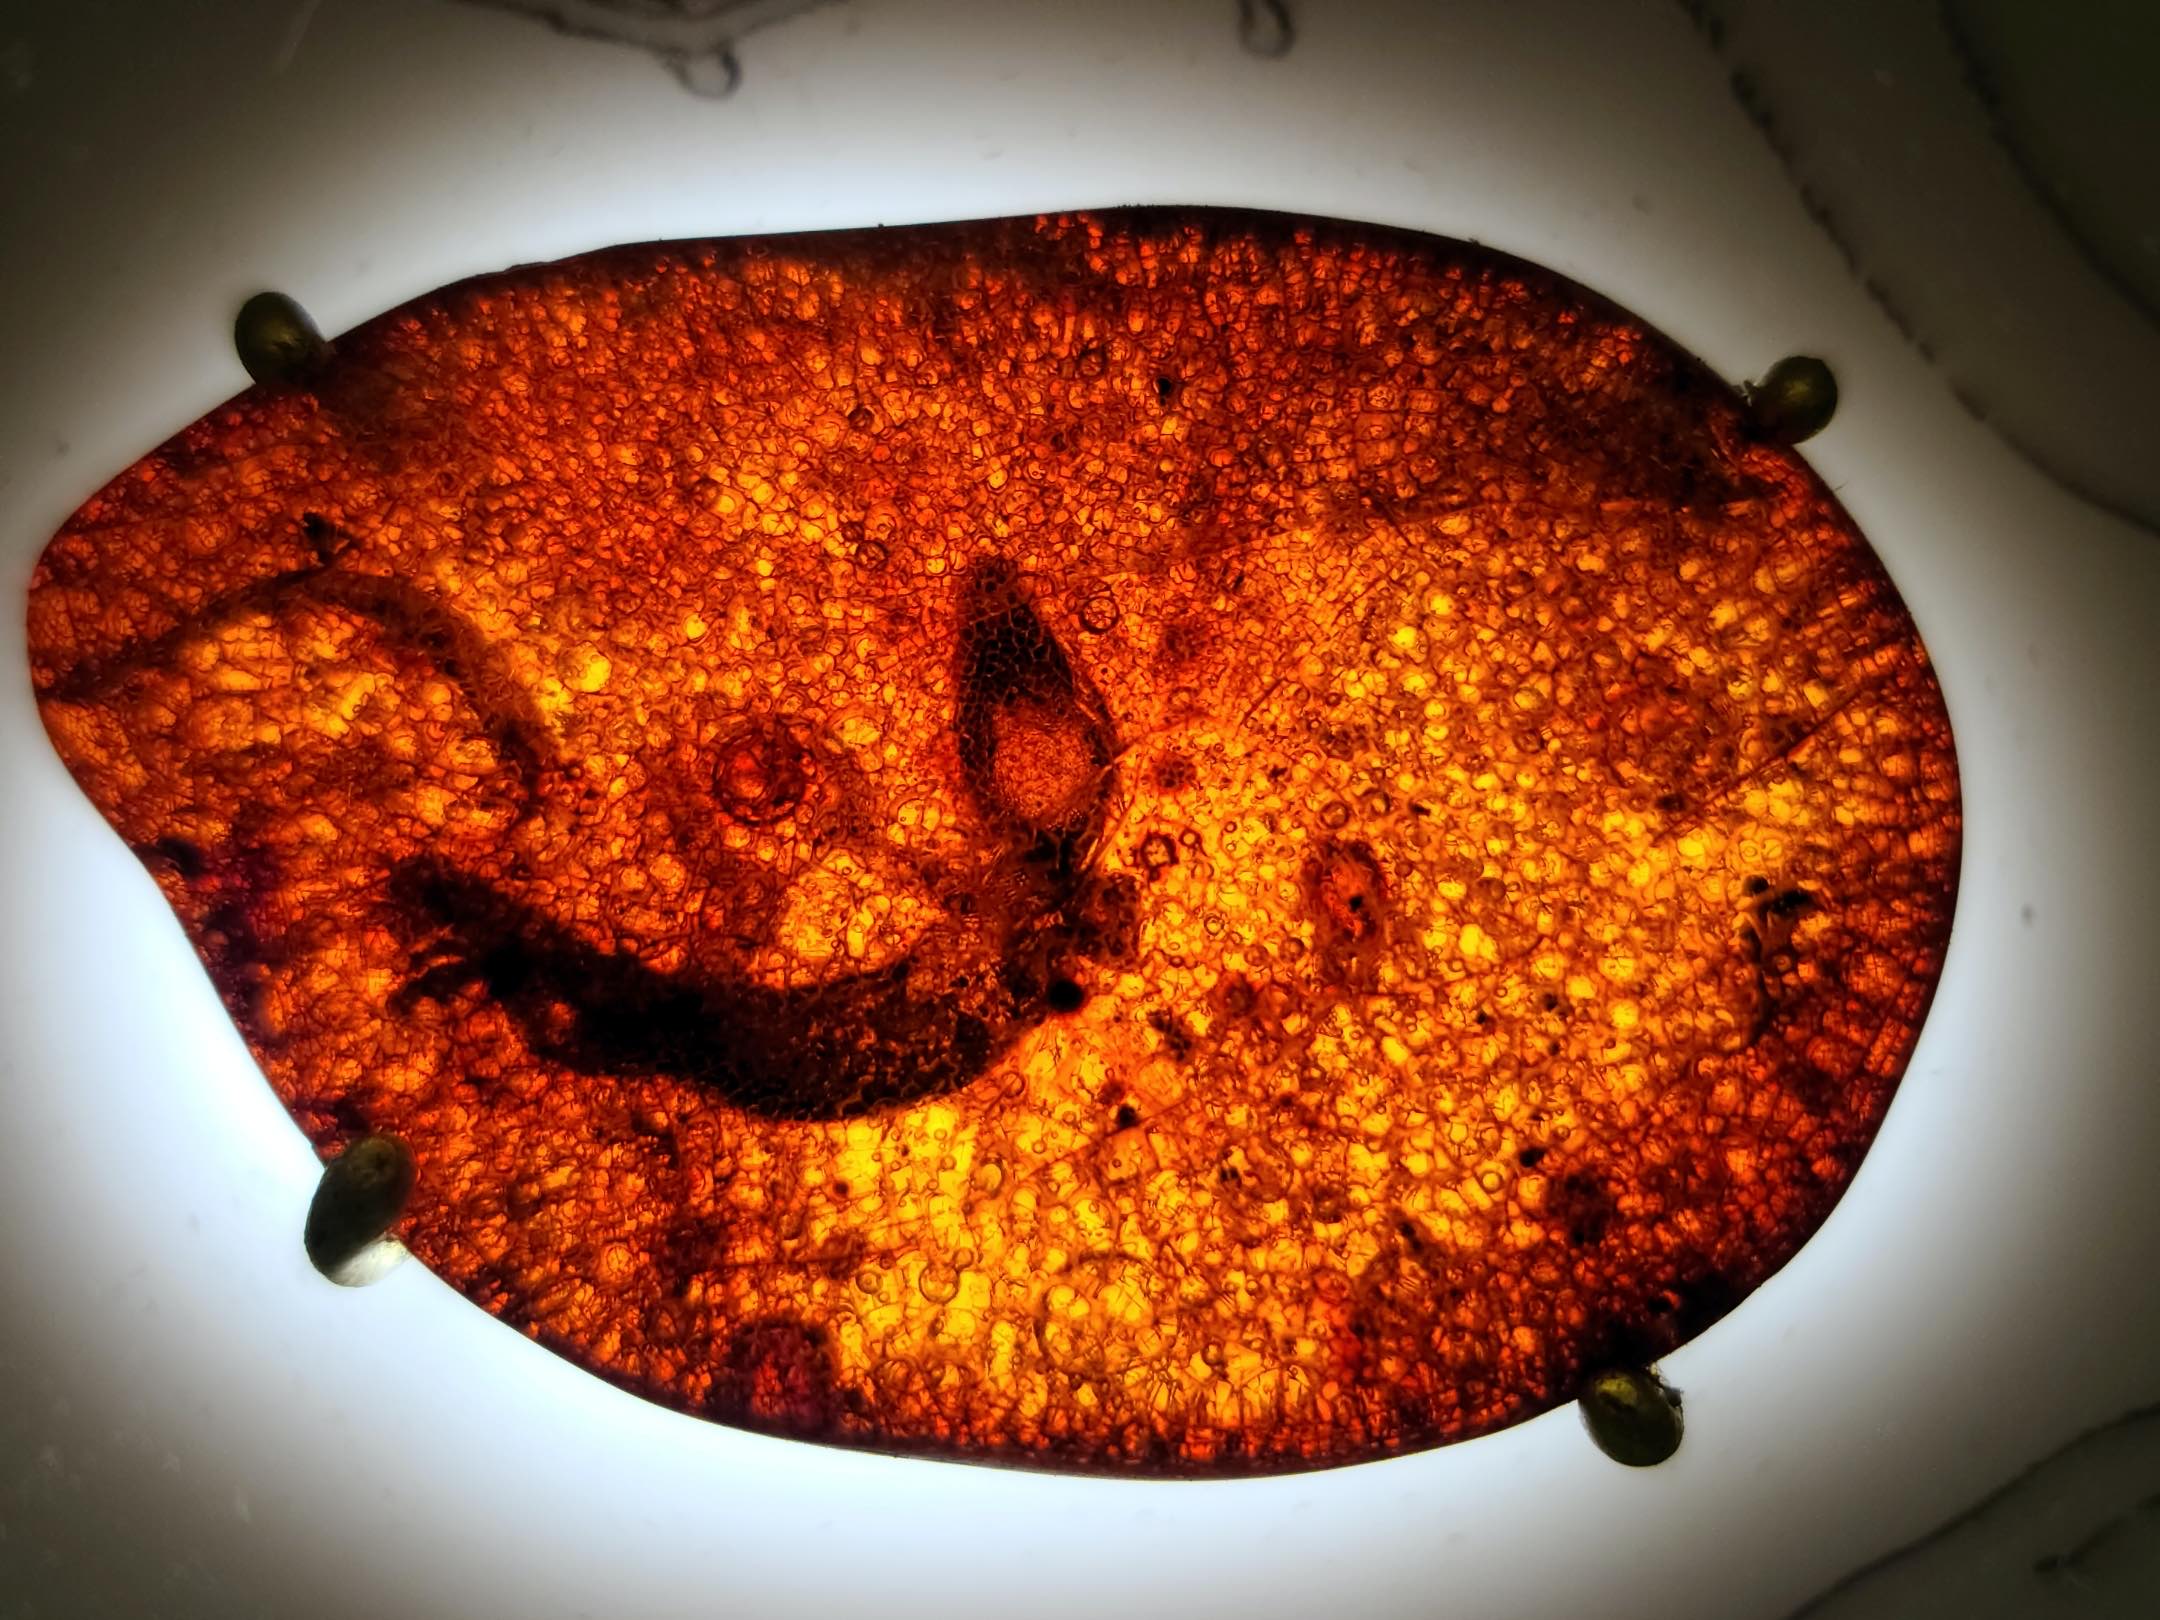 50 million year old fossil, a lizard trapped in Amber